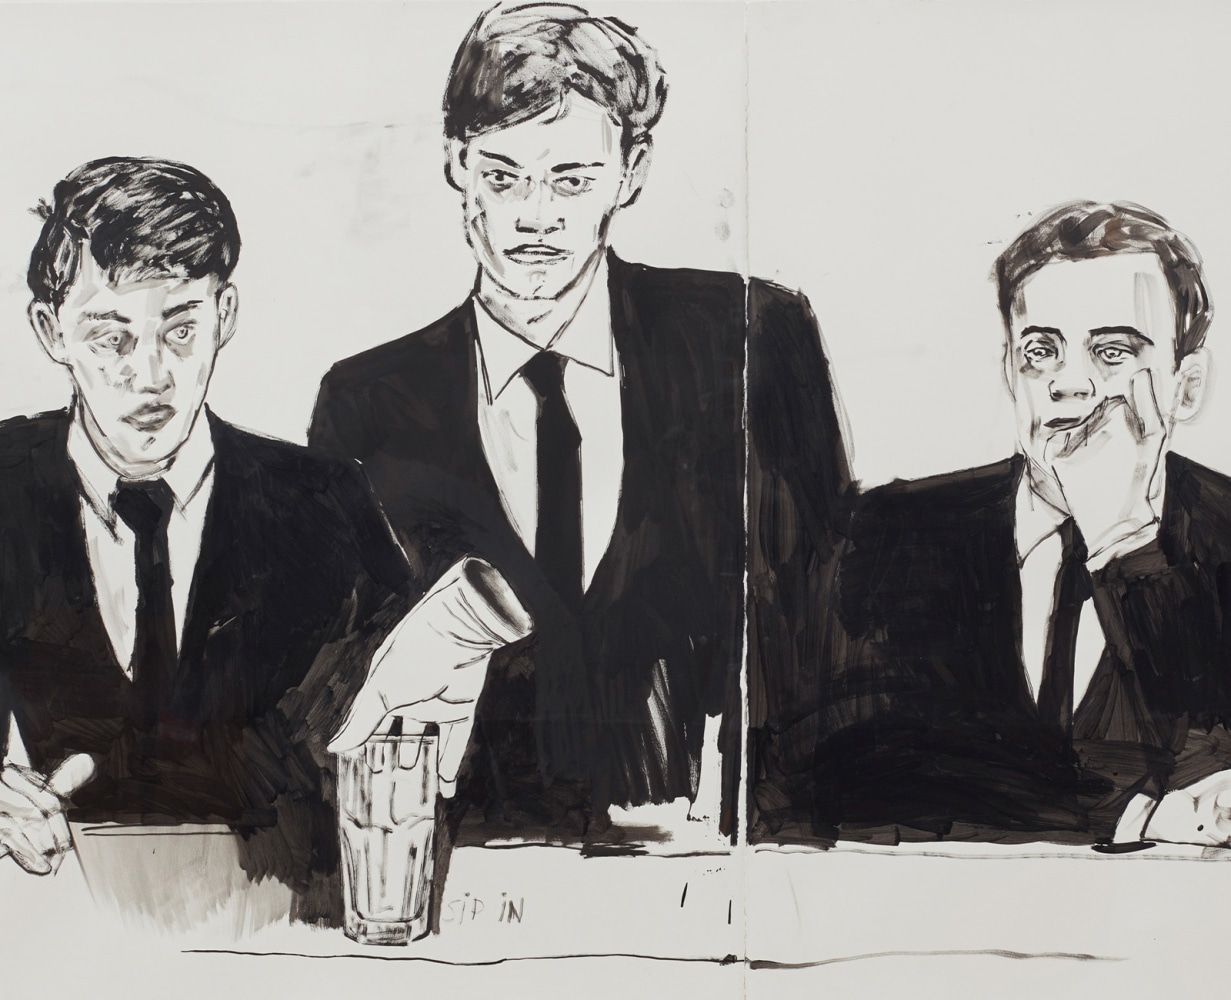 HERNAN BAS

Sip In (study), 2019 (detail)

Pencil and ink on paper

30 x 45 inches (paper)

76.2 x 114.3 cm

33.5 x 48.5 x 2 inches (framed)

85.1 x 123.2 x 5.1 cm